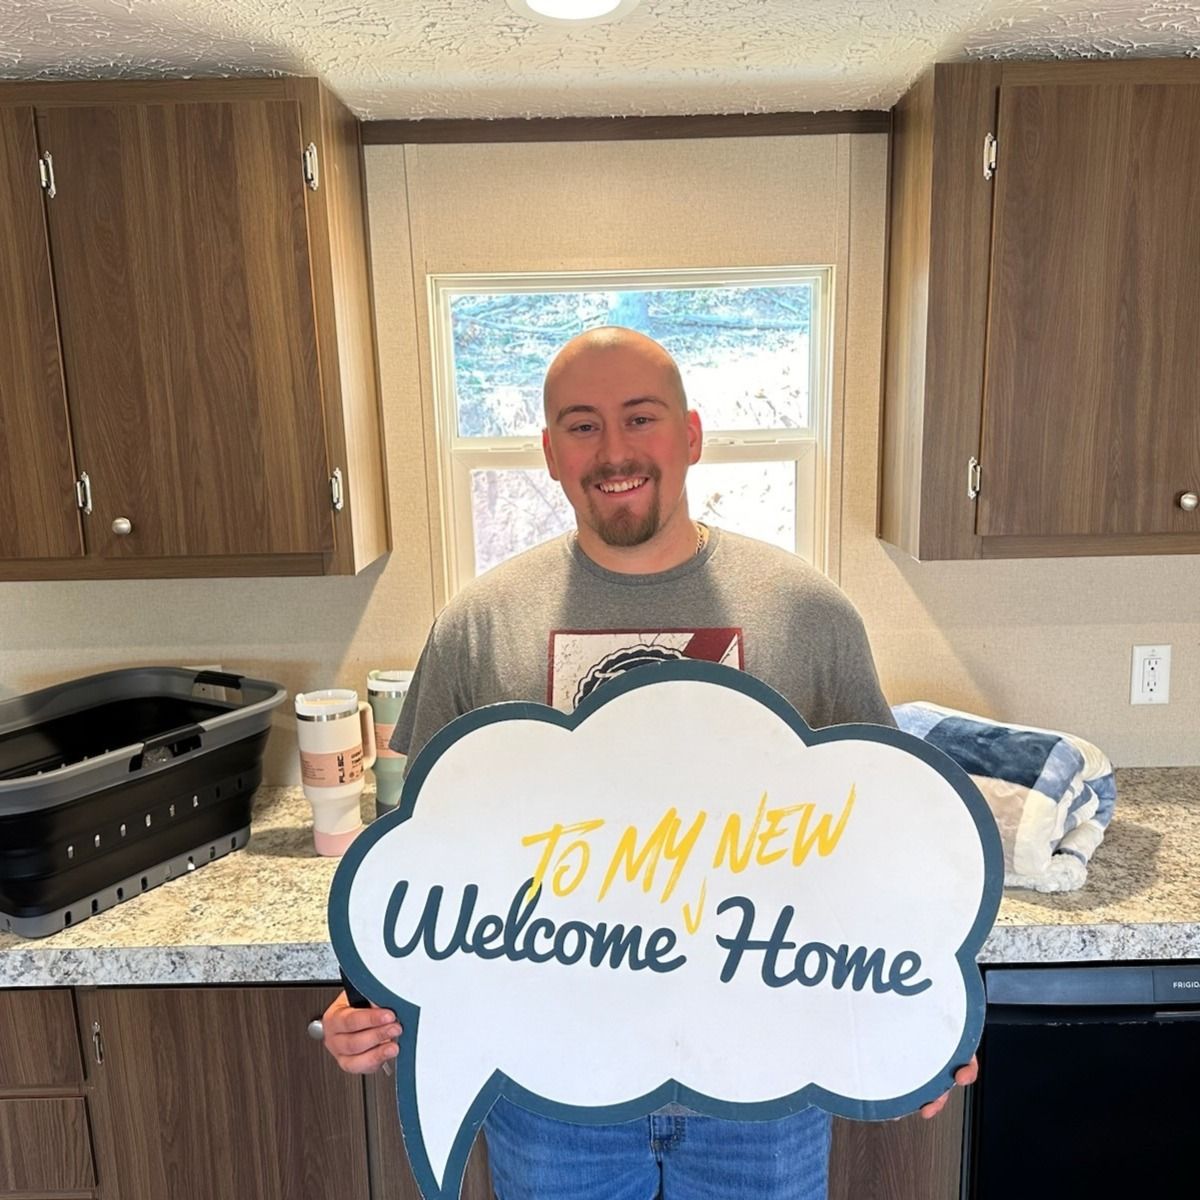 ISAAC P. welcome home image